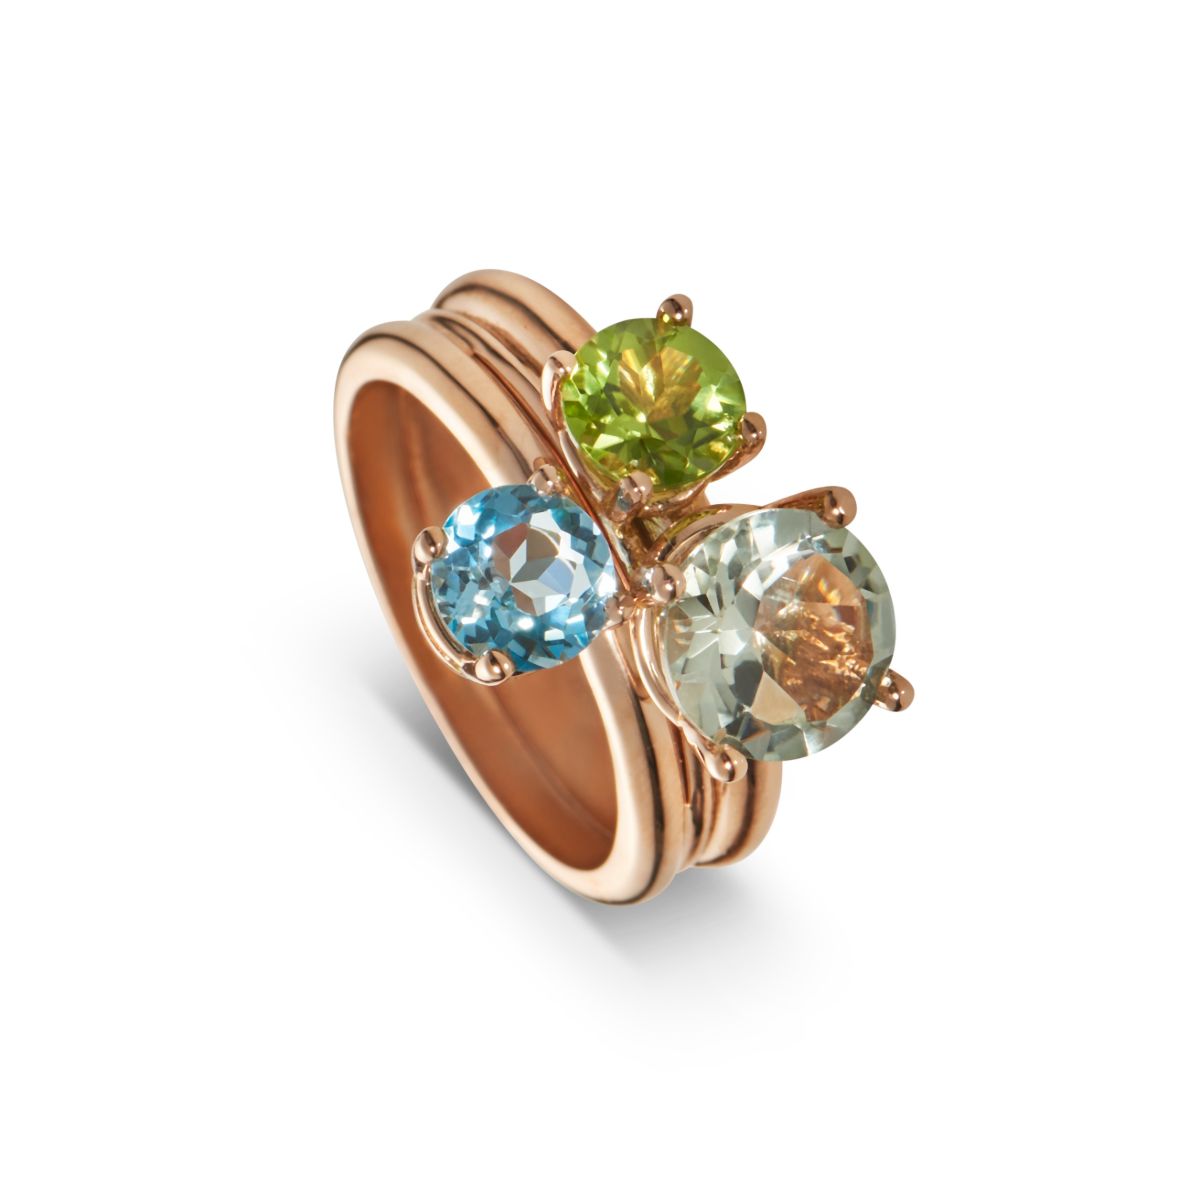 Rose gold ring with prasiolite, peridot, and blue topaz